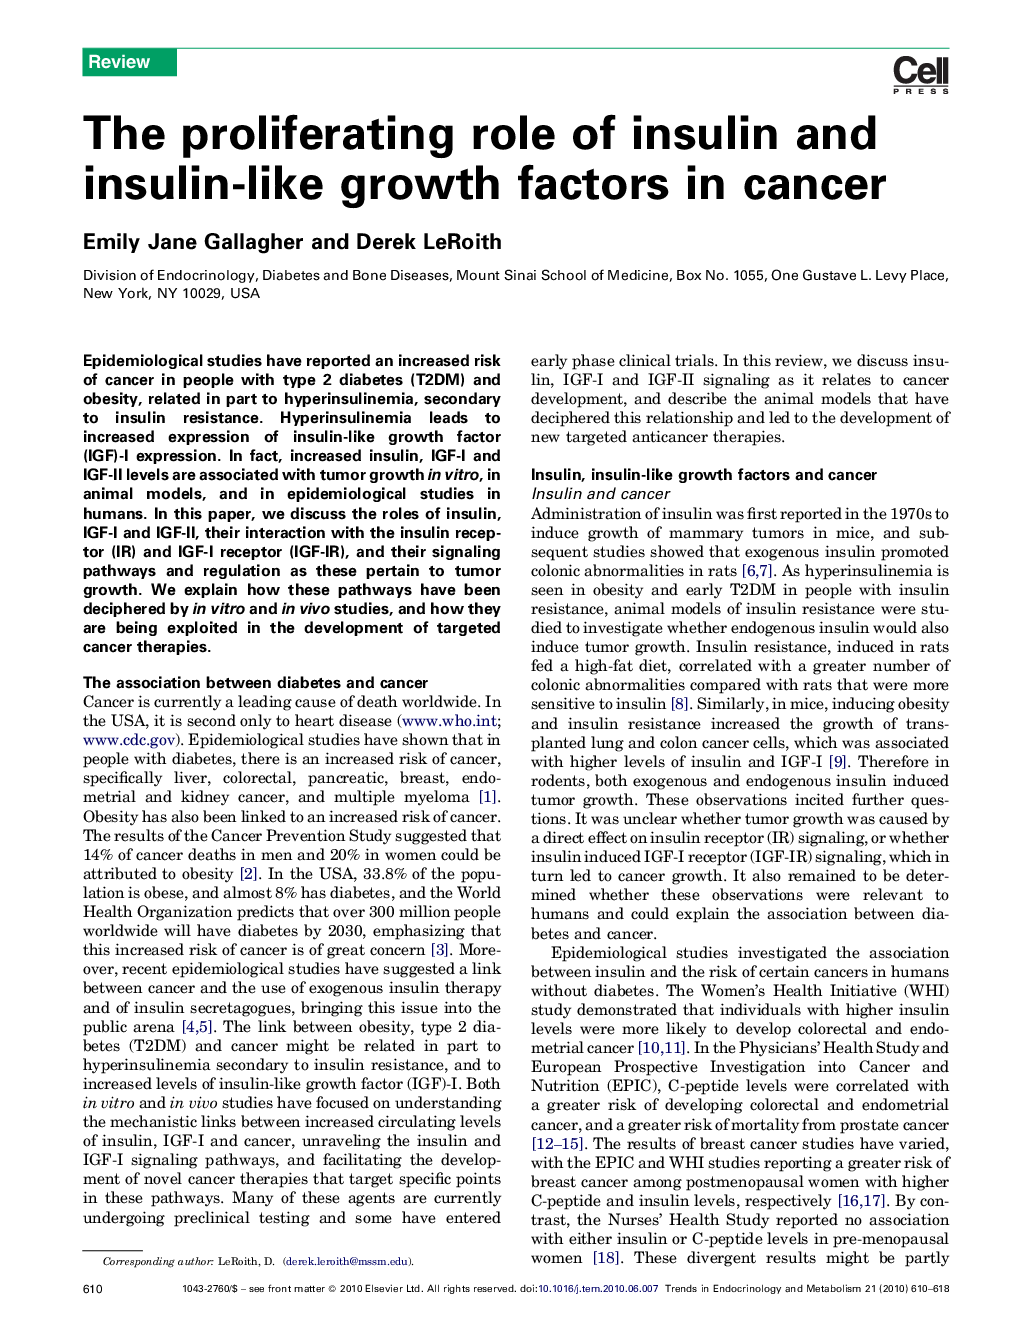 The proliferating role of insulin and insulin-like growth factors in cancer